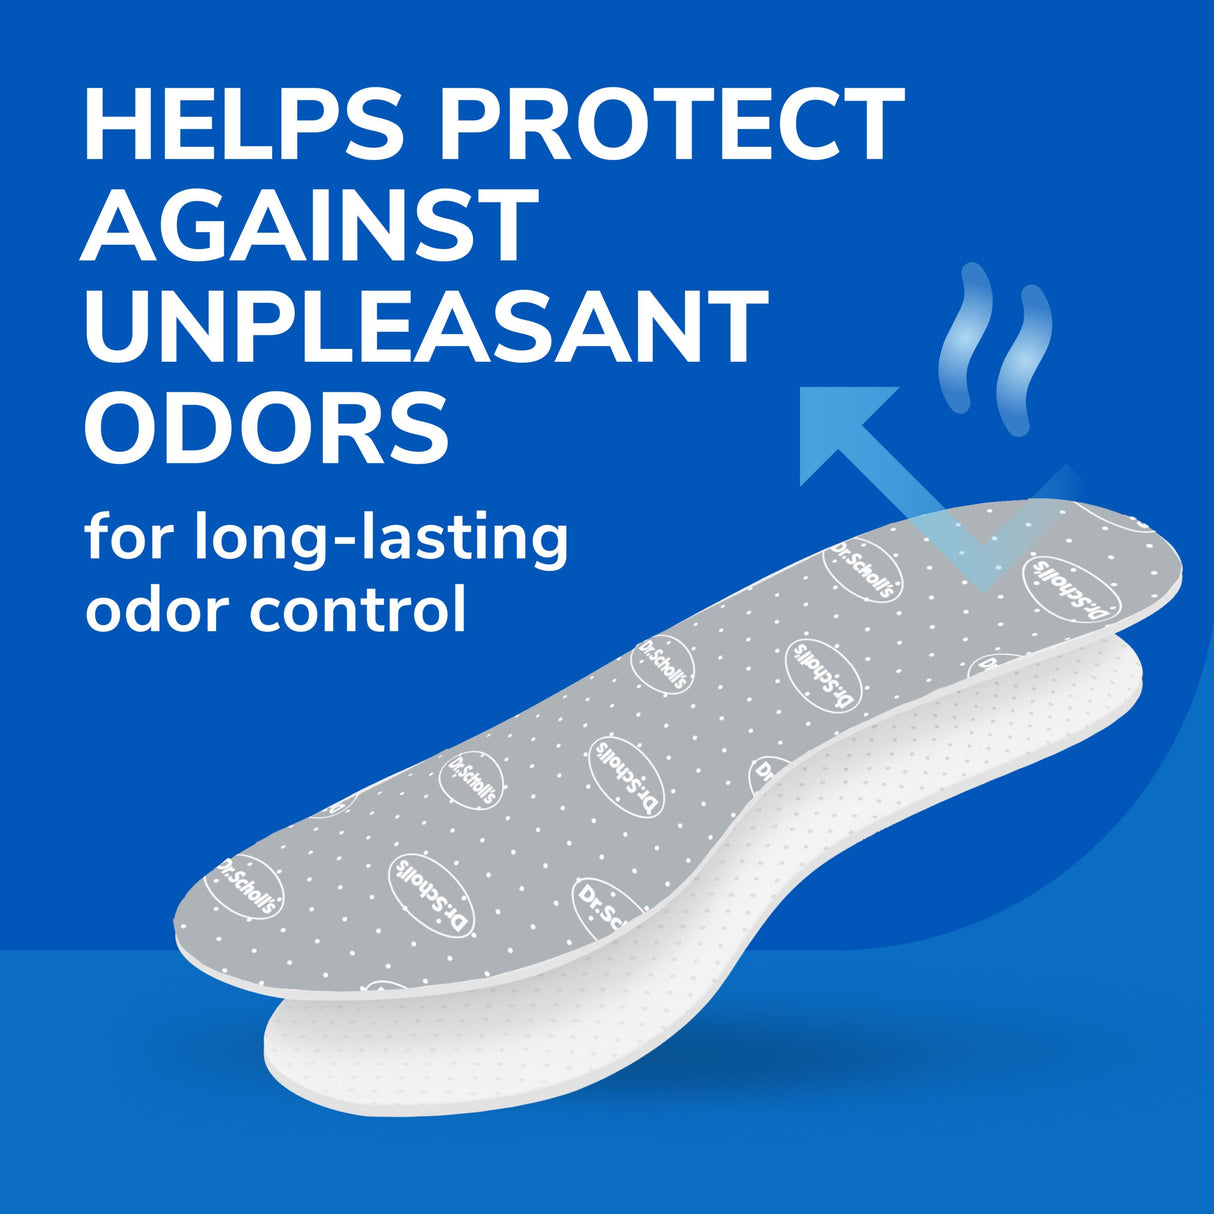 image of help protects against unpleasant odors